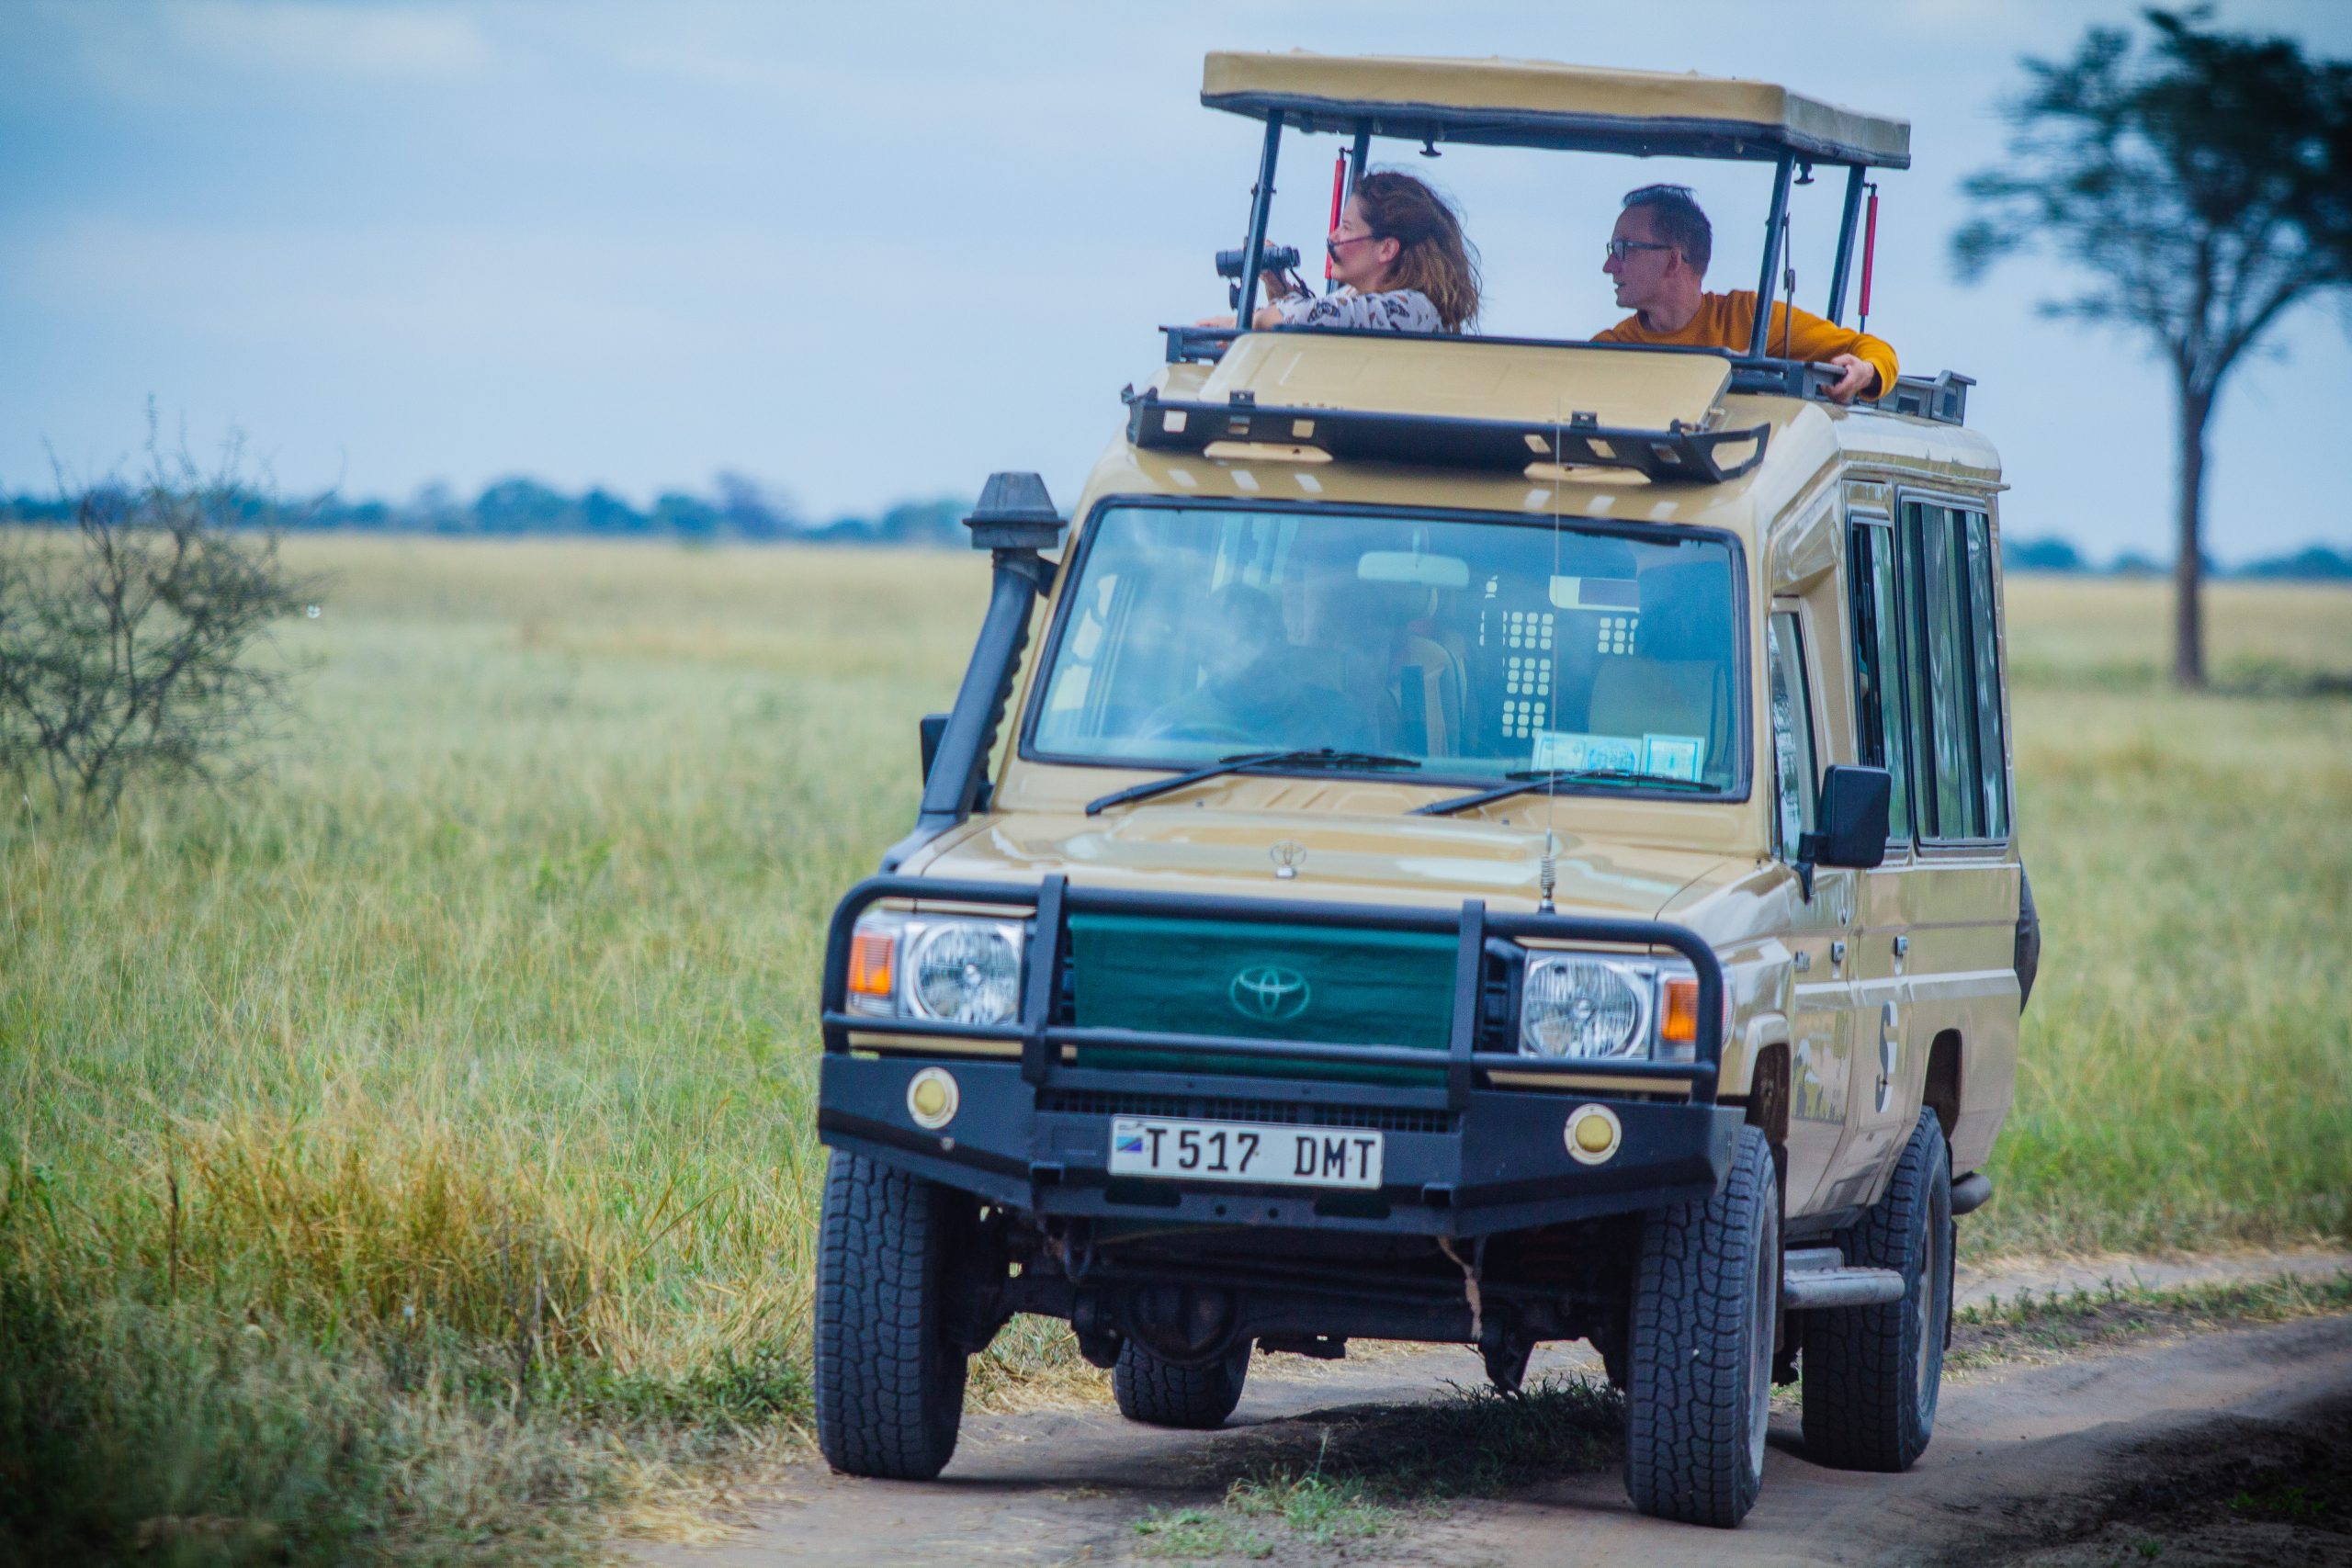 Leyu Tours provides sustainable and personalized travel experiences in Tanzania and Zanzibar, with a commitment to responsible tourism.